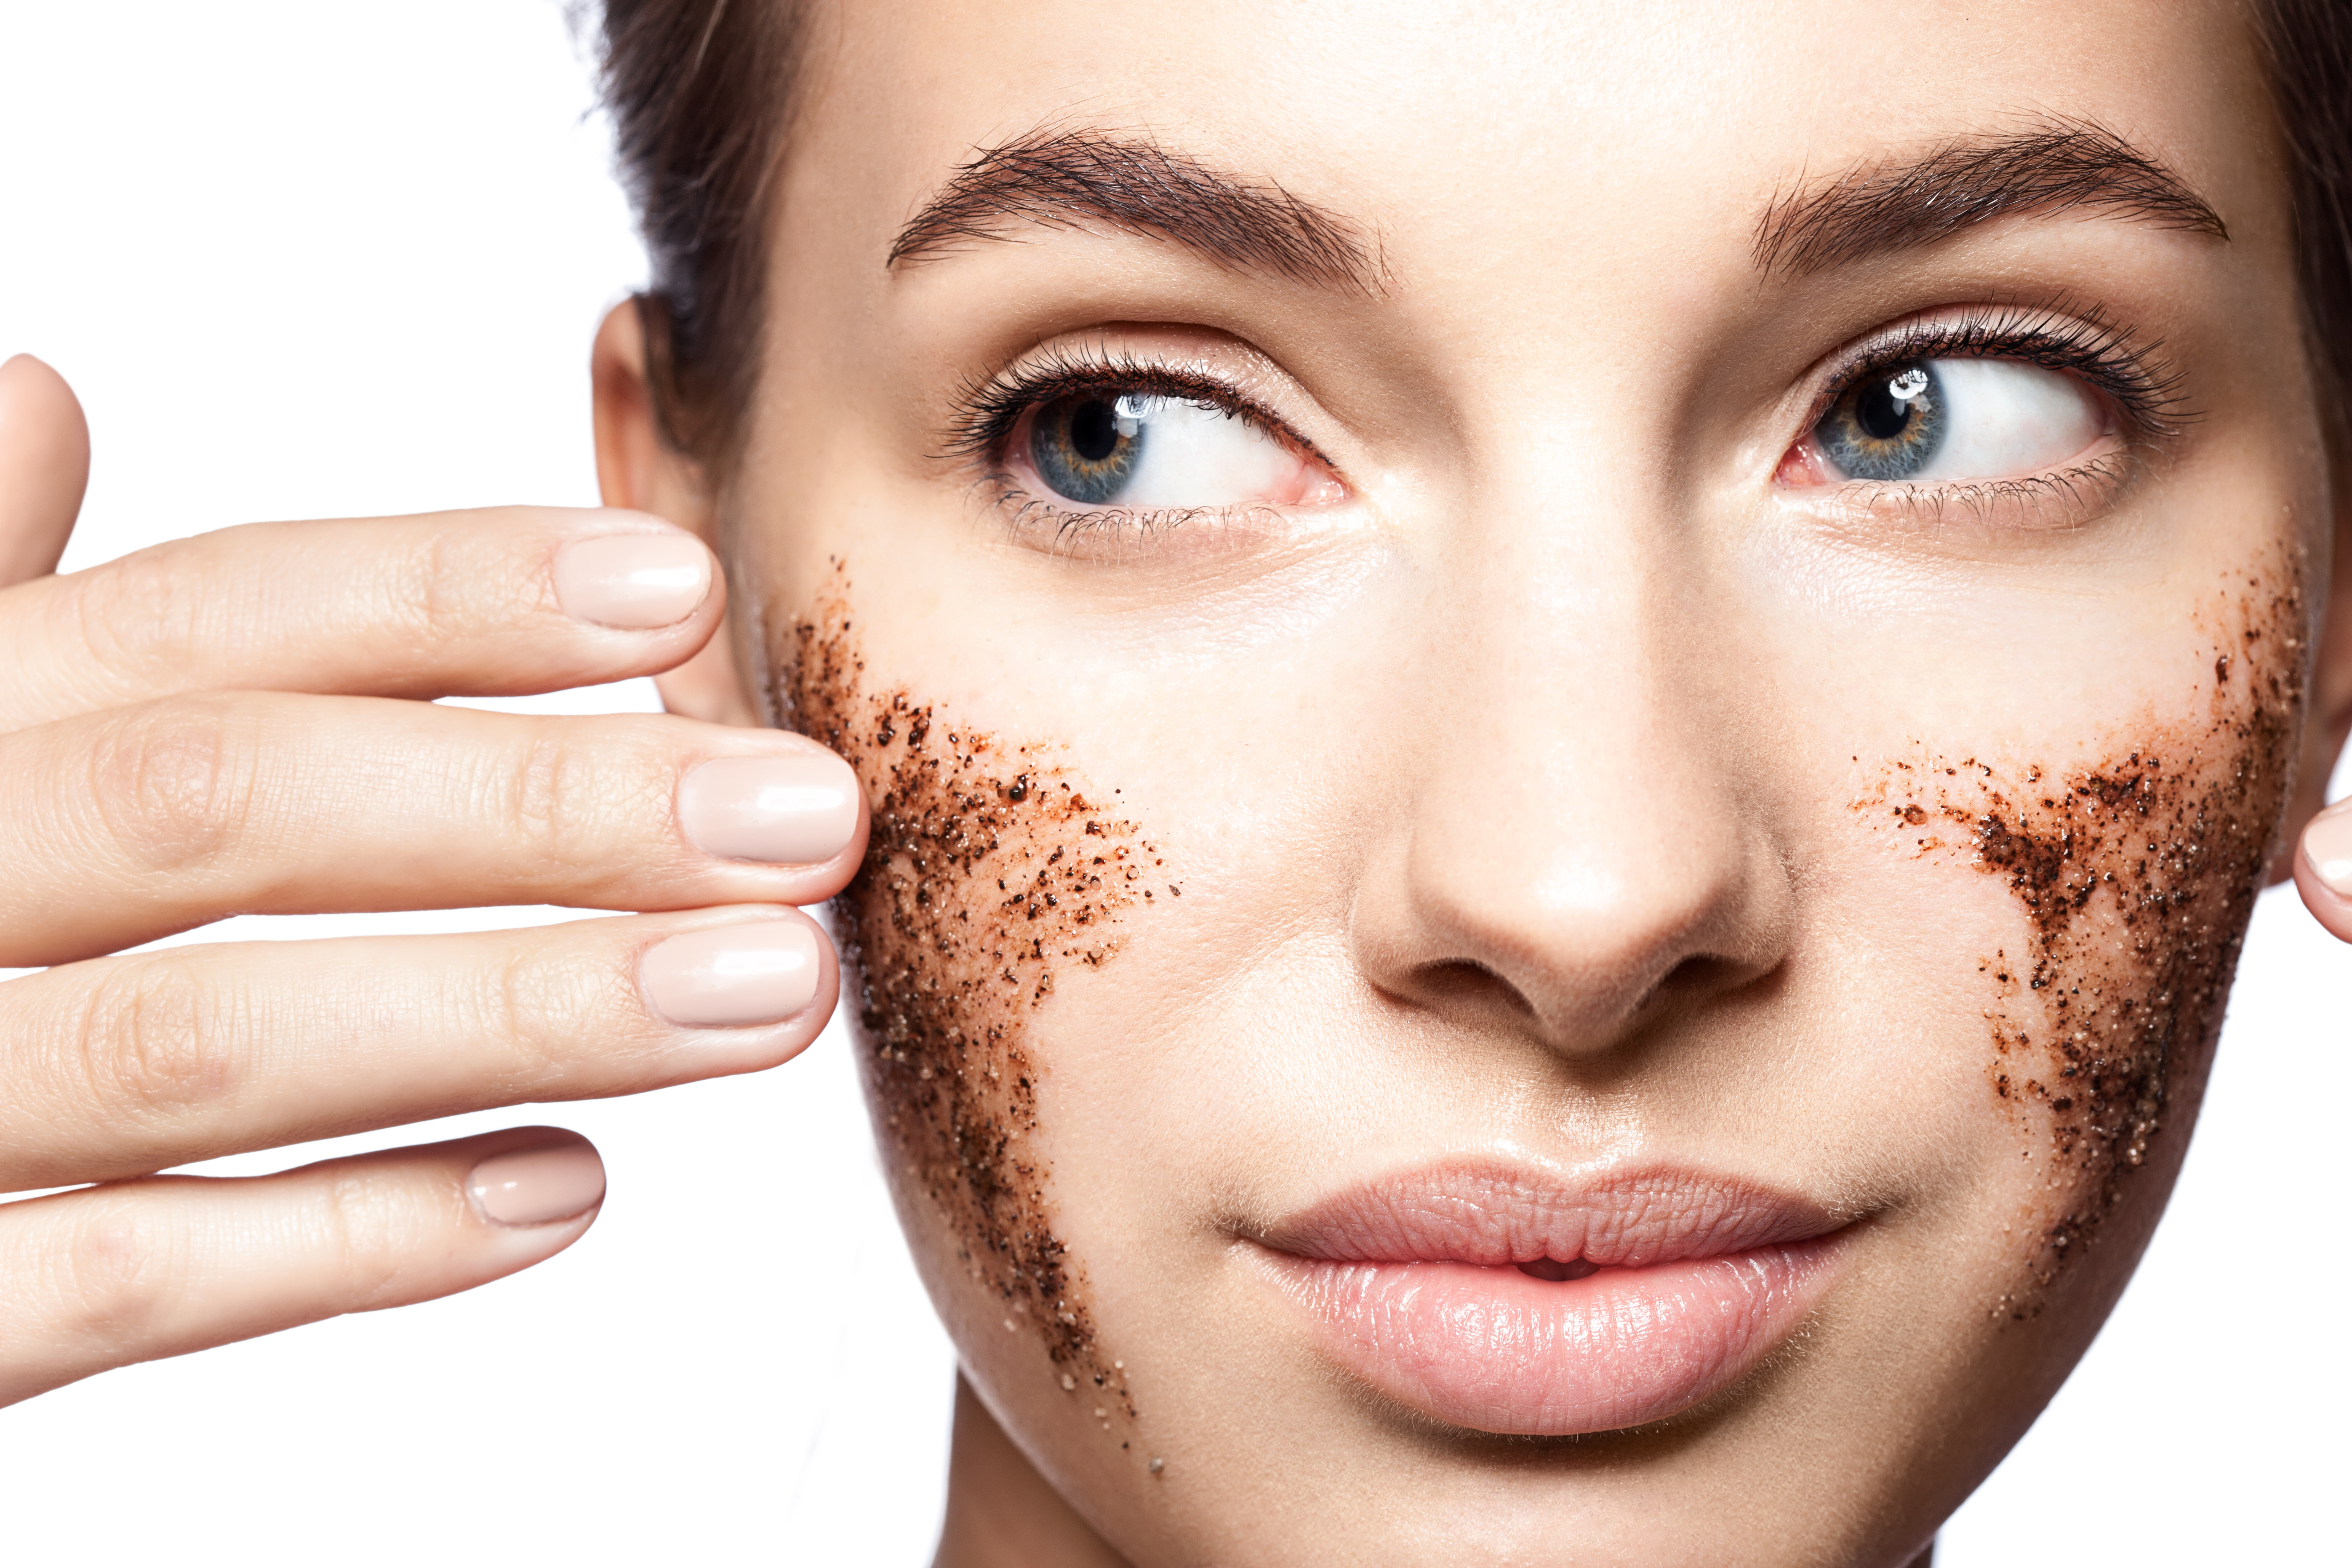 Close-up-portrait-of-a-beautiful-woman-with-a-coffee-scrub-on-her-face-doing-peeling-skin-isolated-on-white-background-825324532_5616x3744.jpeg